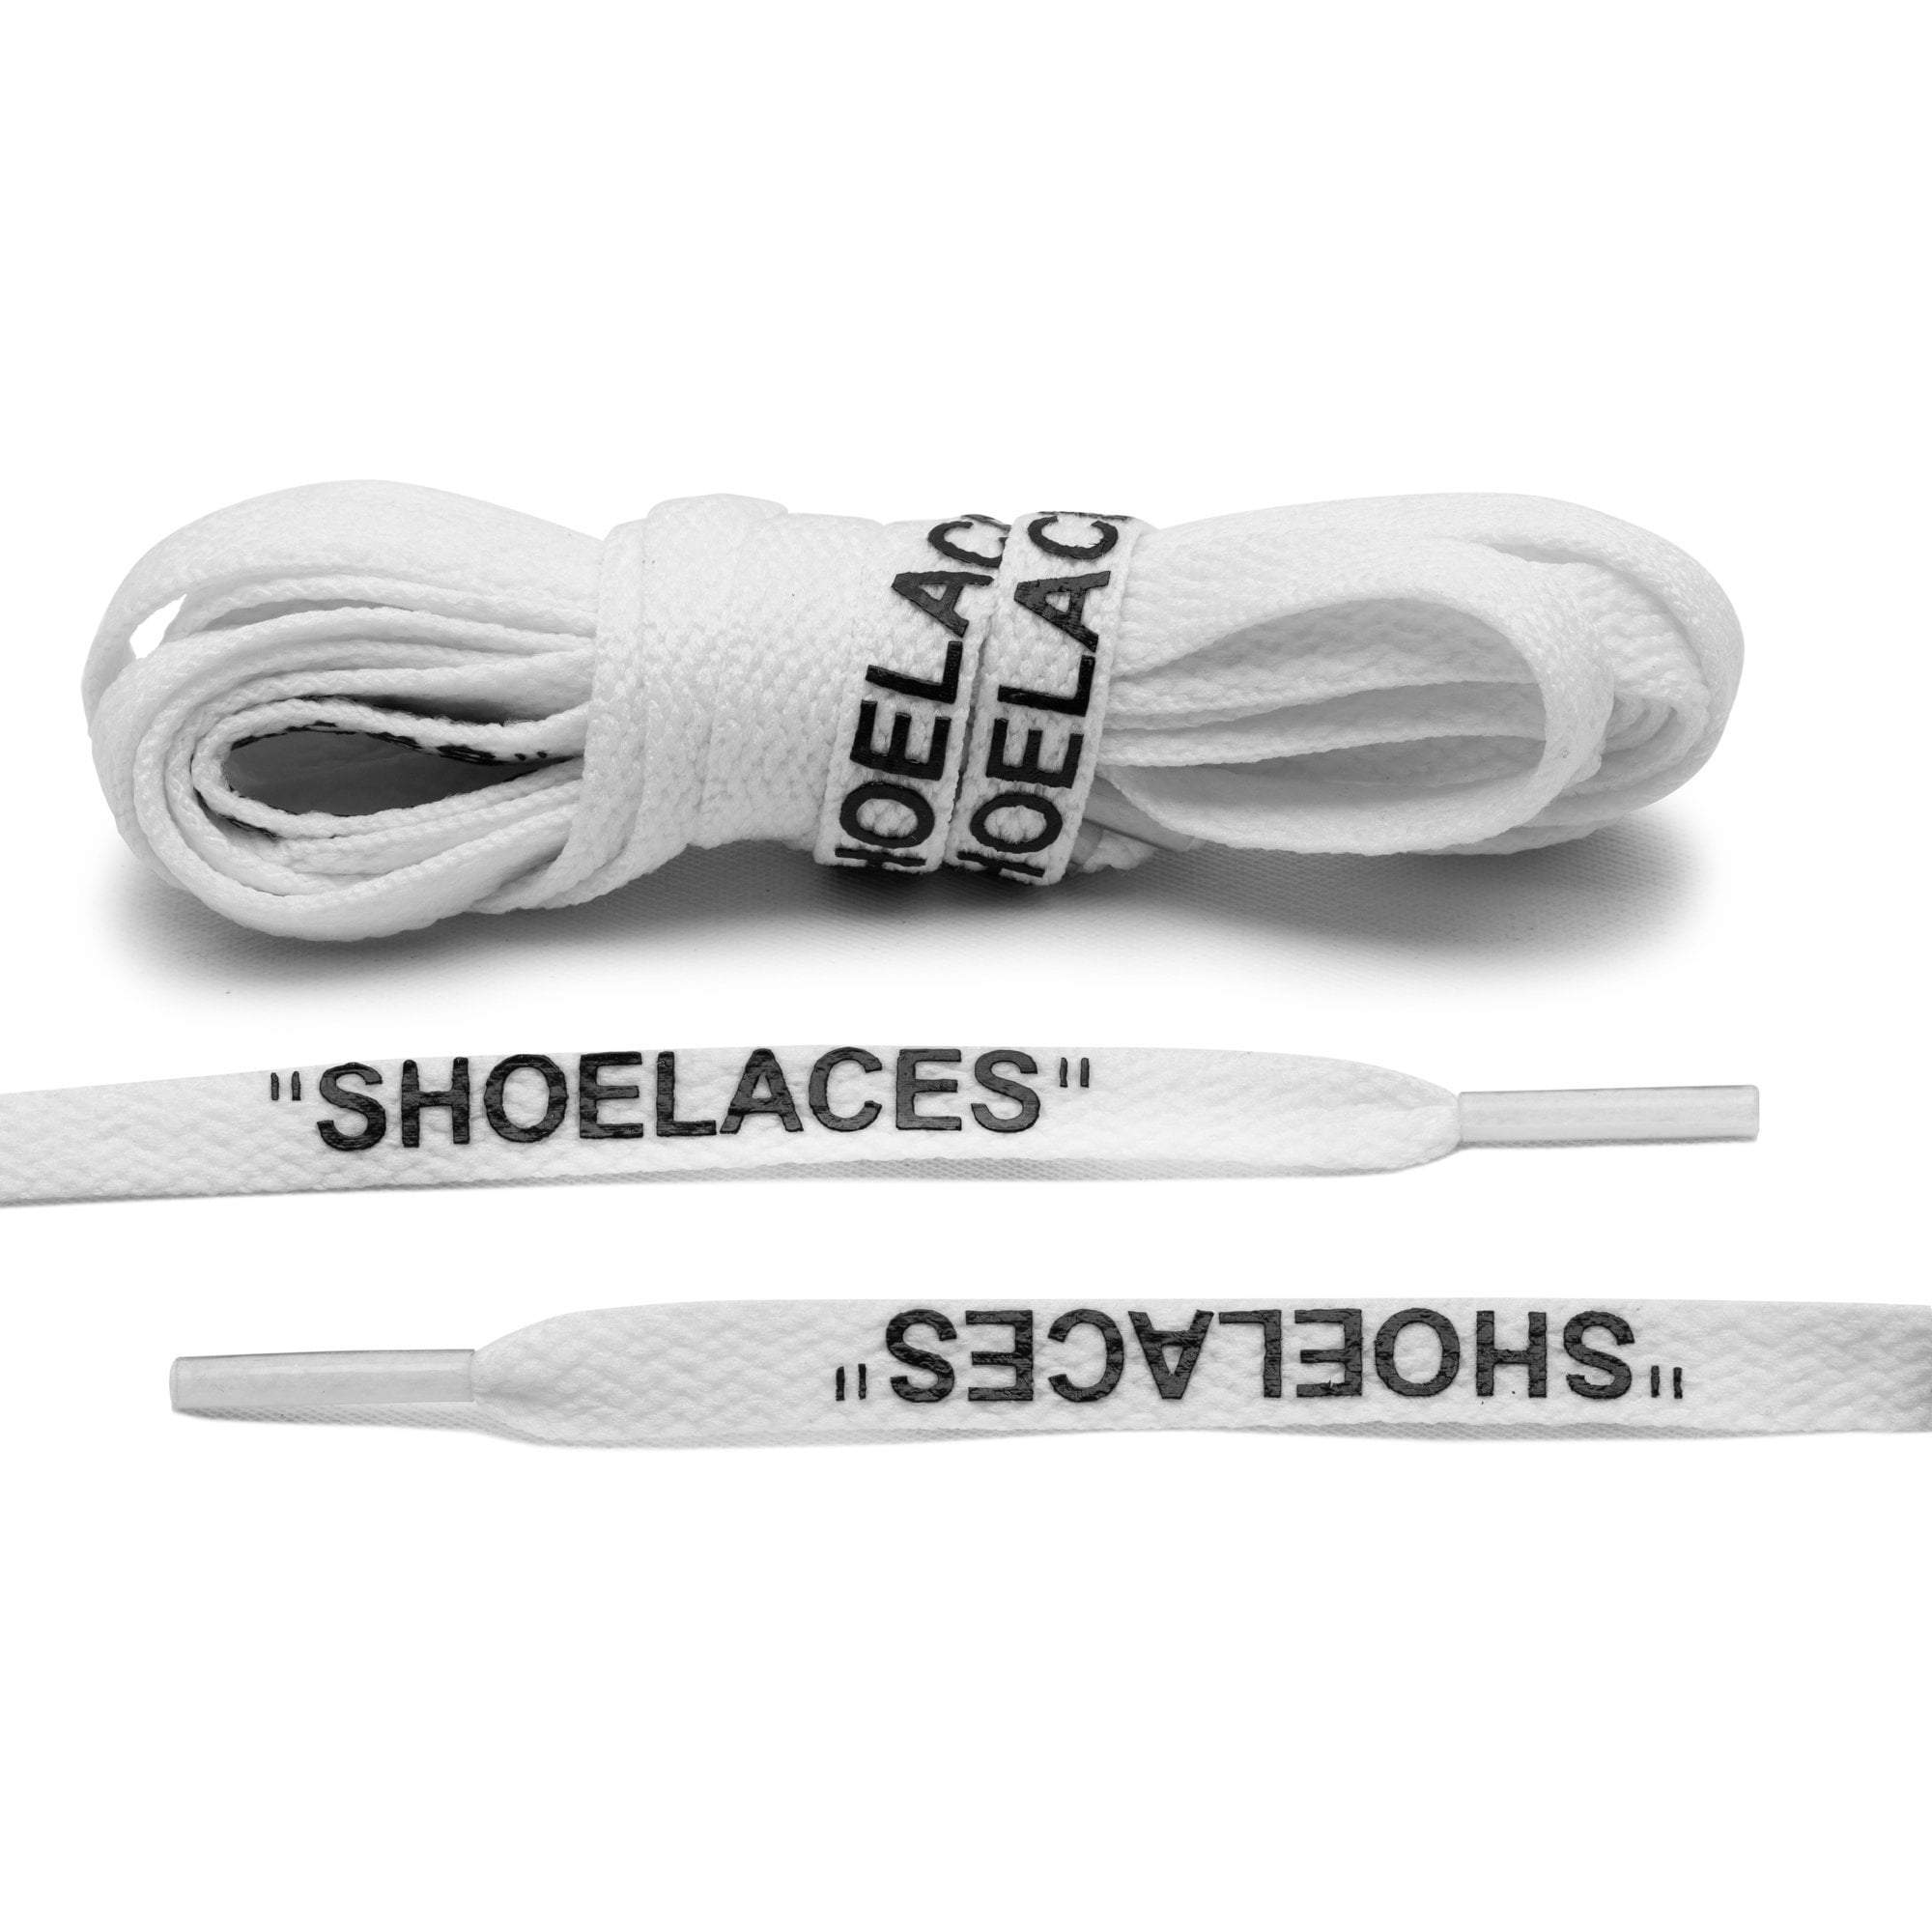 Off-White Style "Shoelaces" By Lace Lab